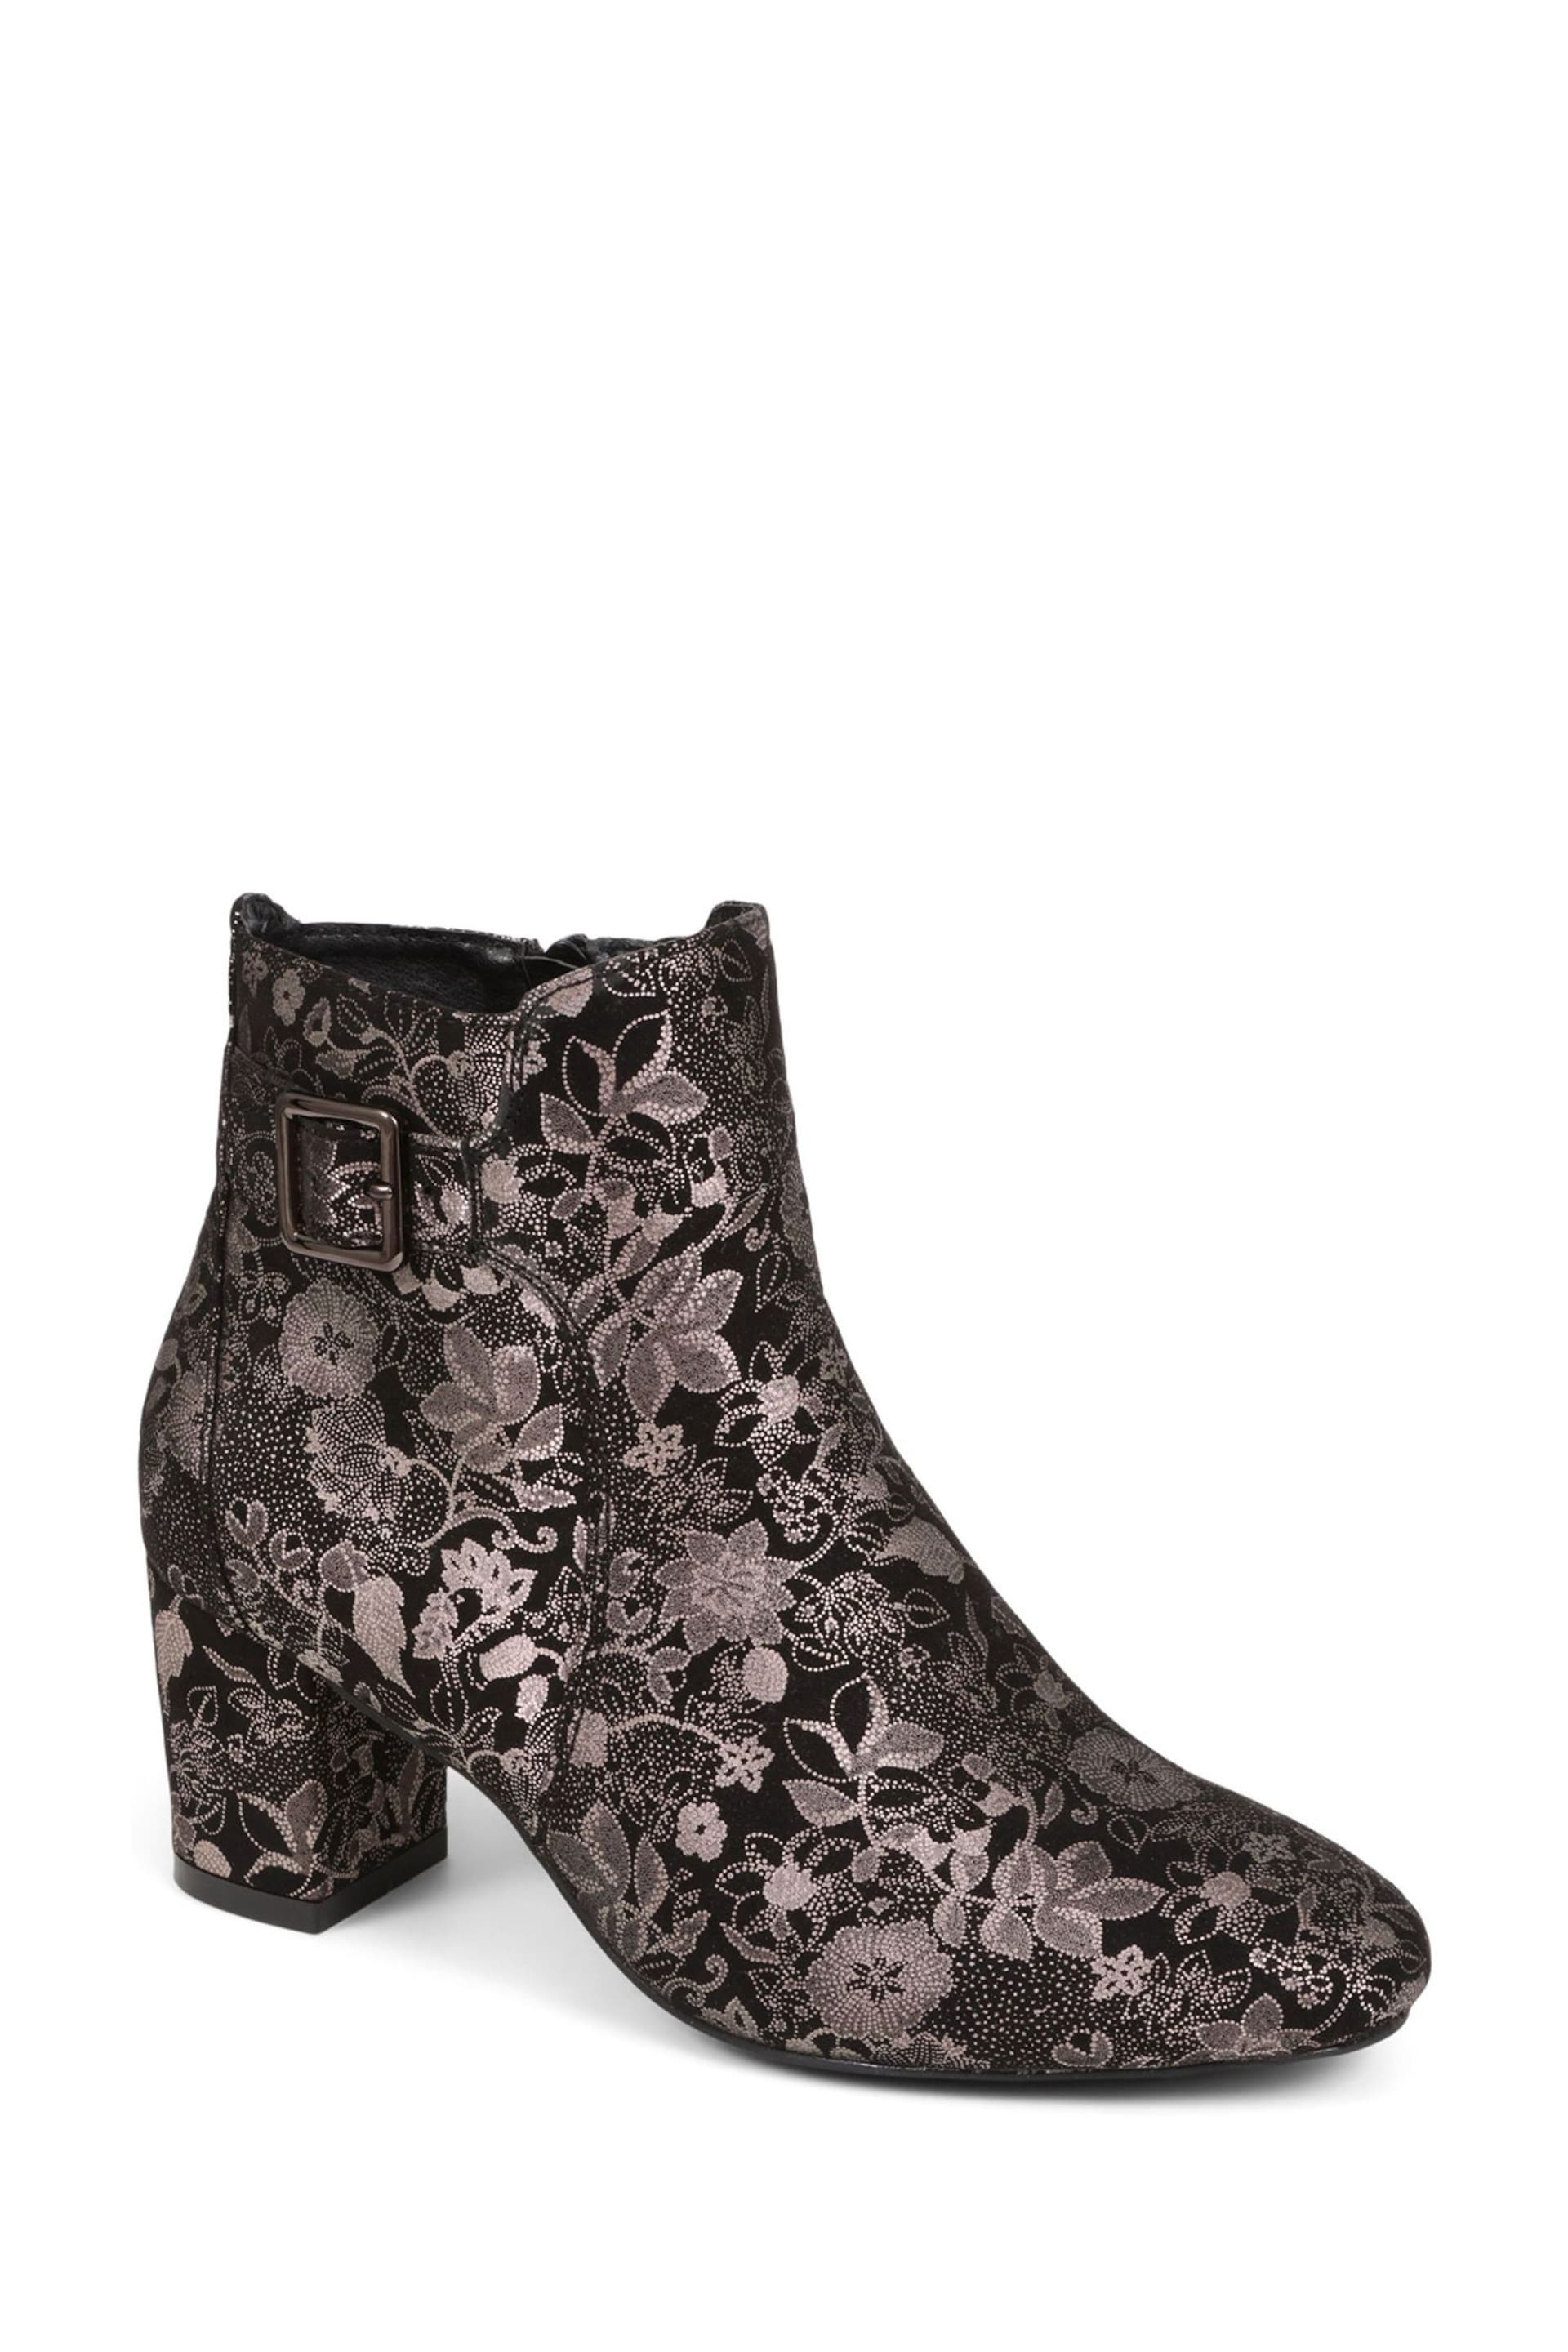 Pavers Heeled Floral Black Ankle Boots - Image 2 of 5